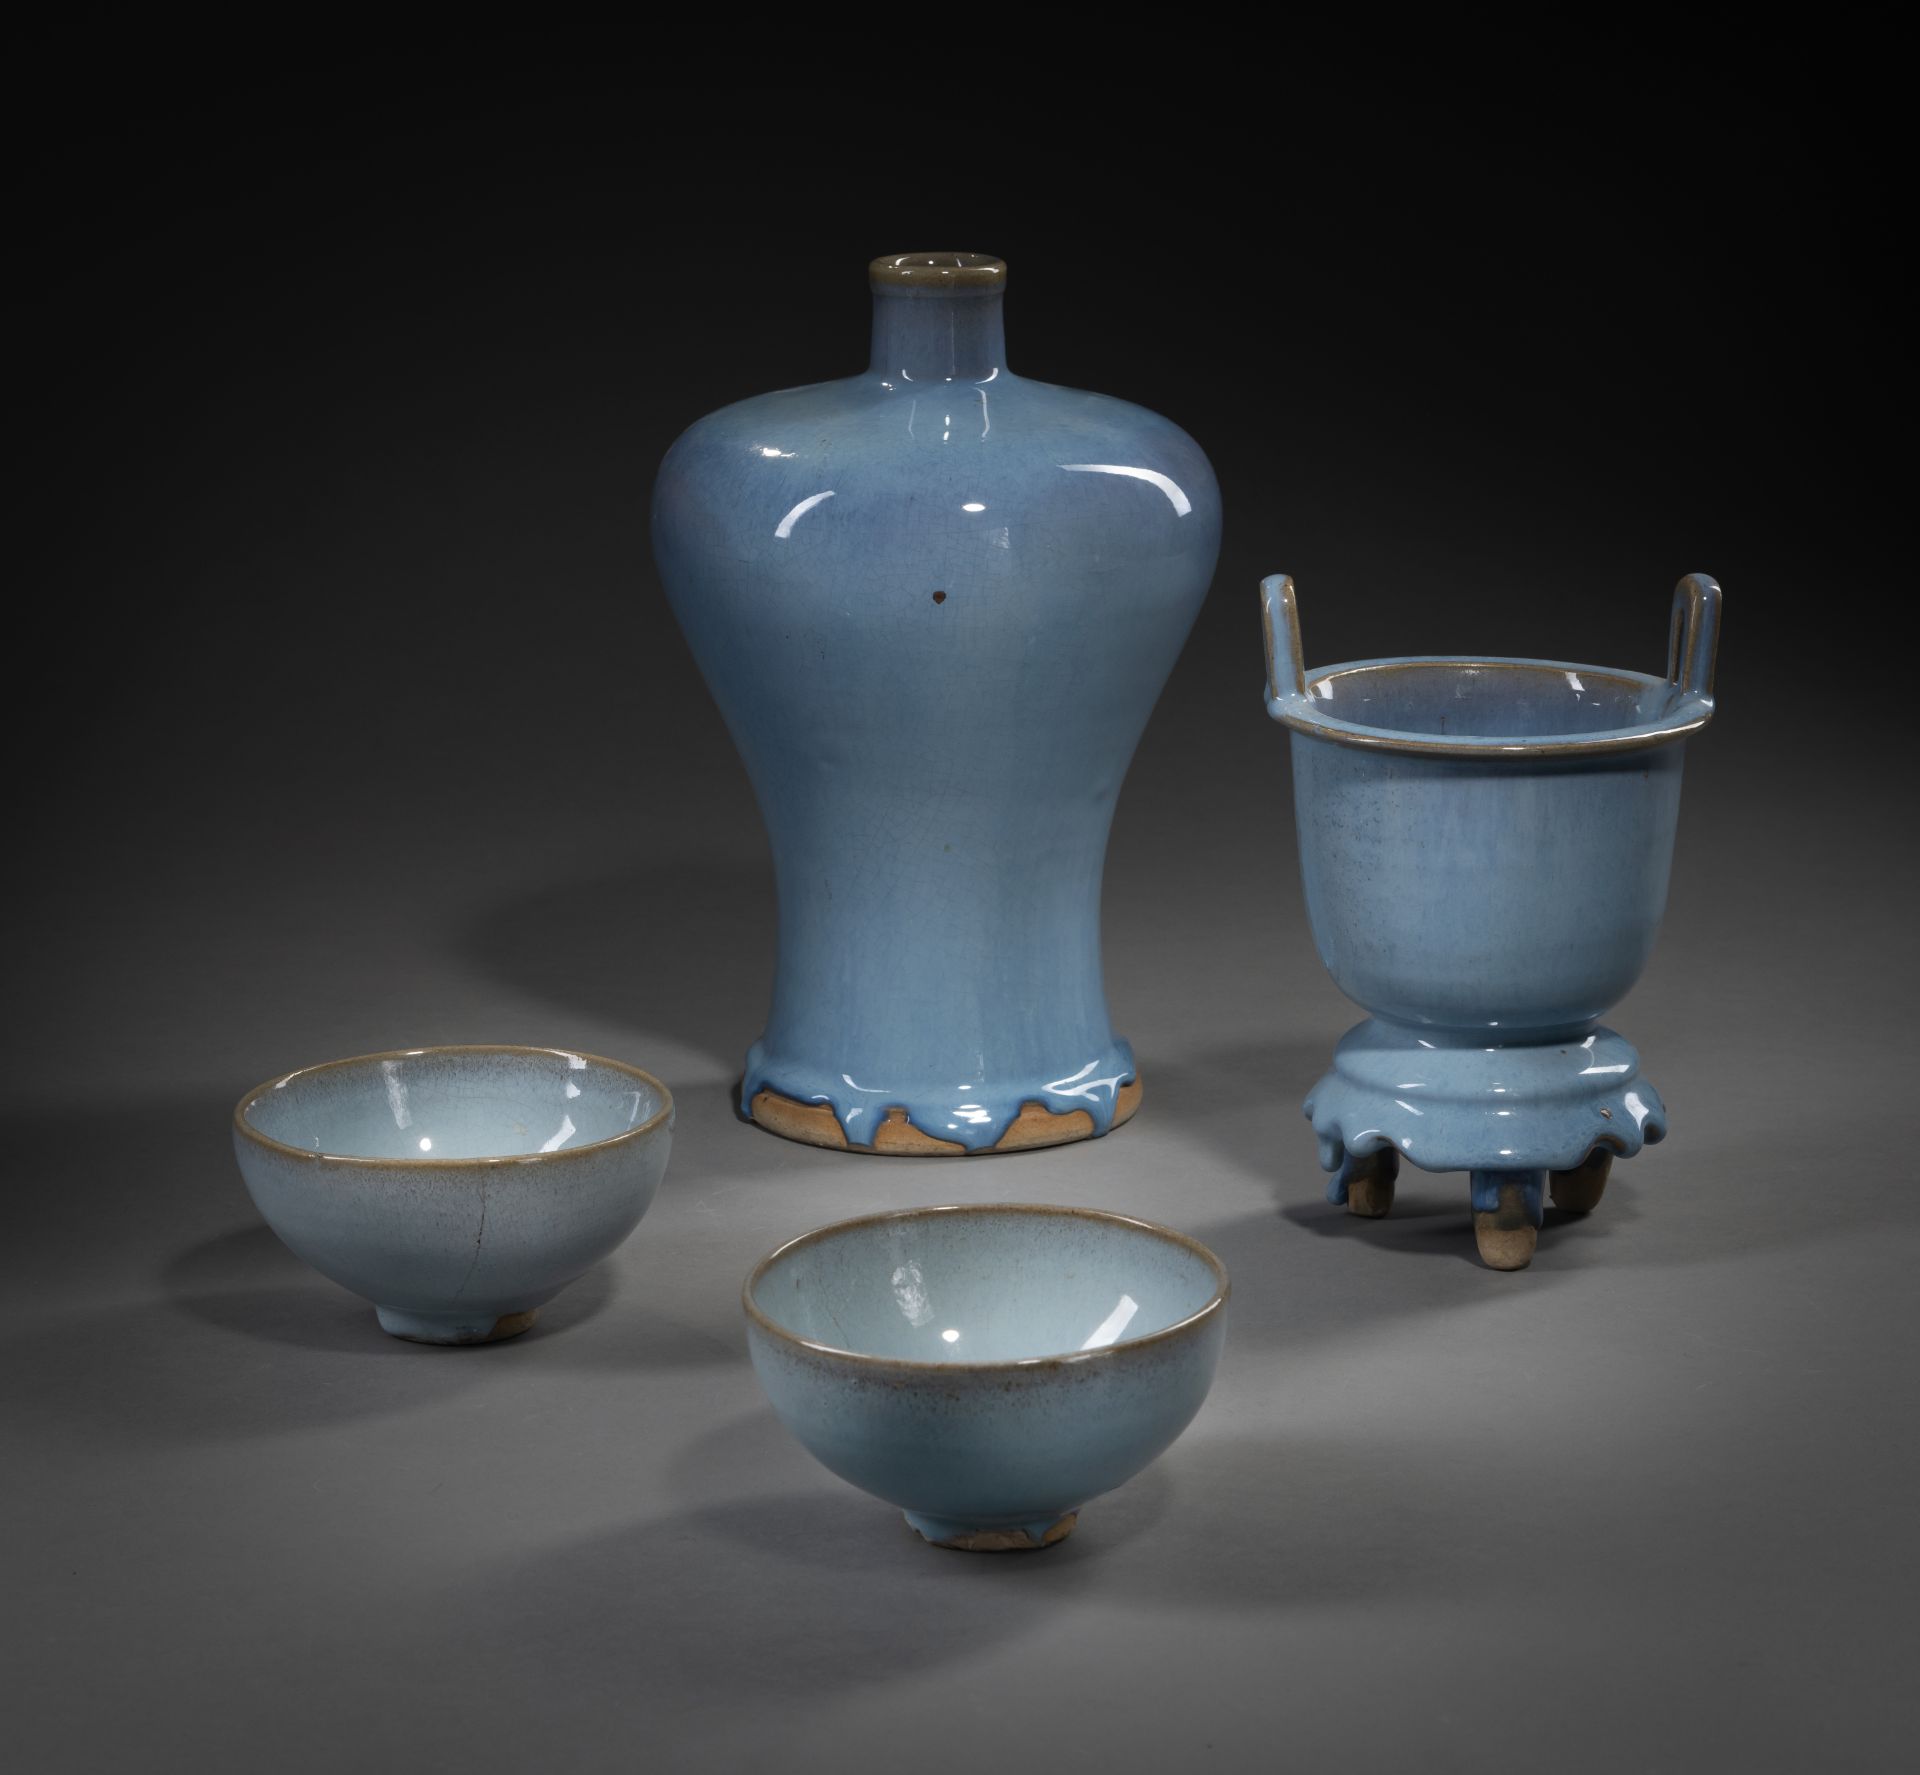 A PAIR OF JUN-GLAZED BOWLS, A TRIPOD CENSER, AND A VASE 'MEIPING'